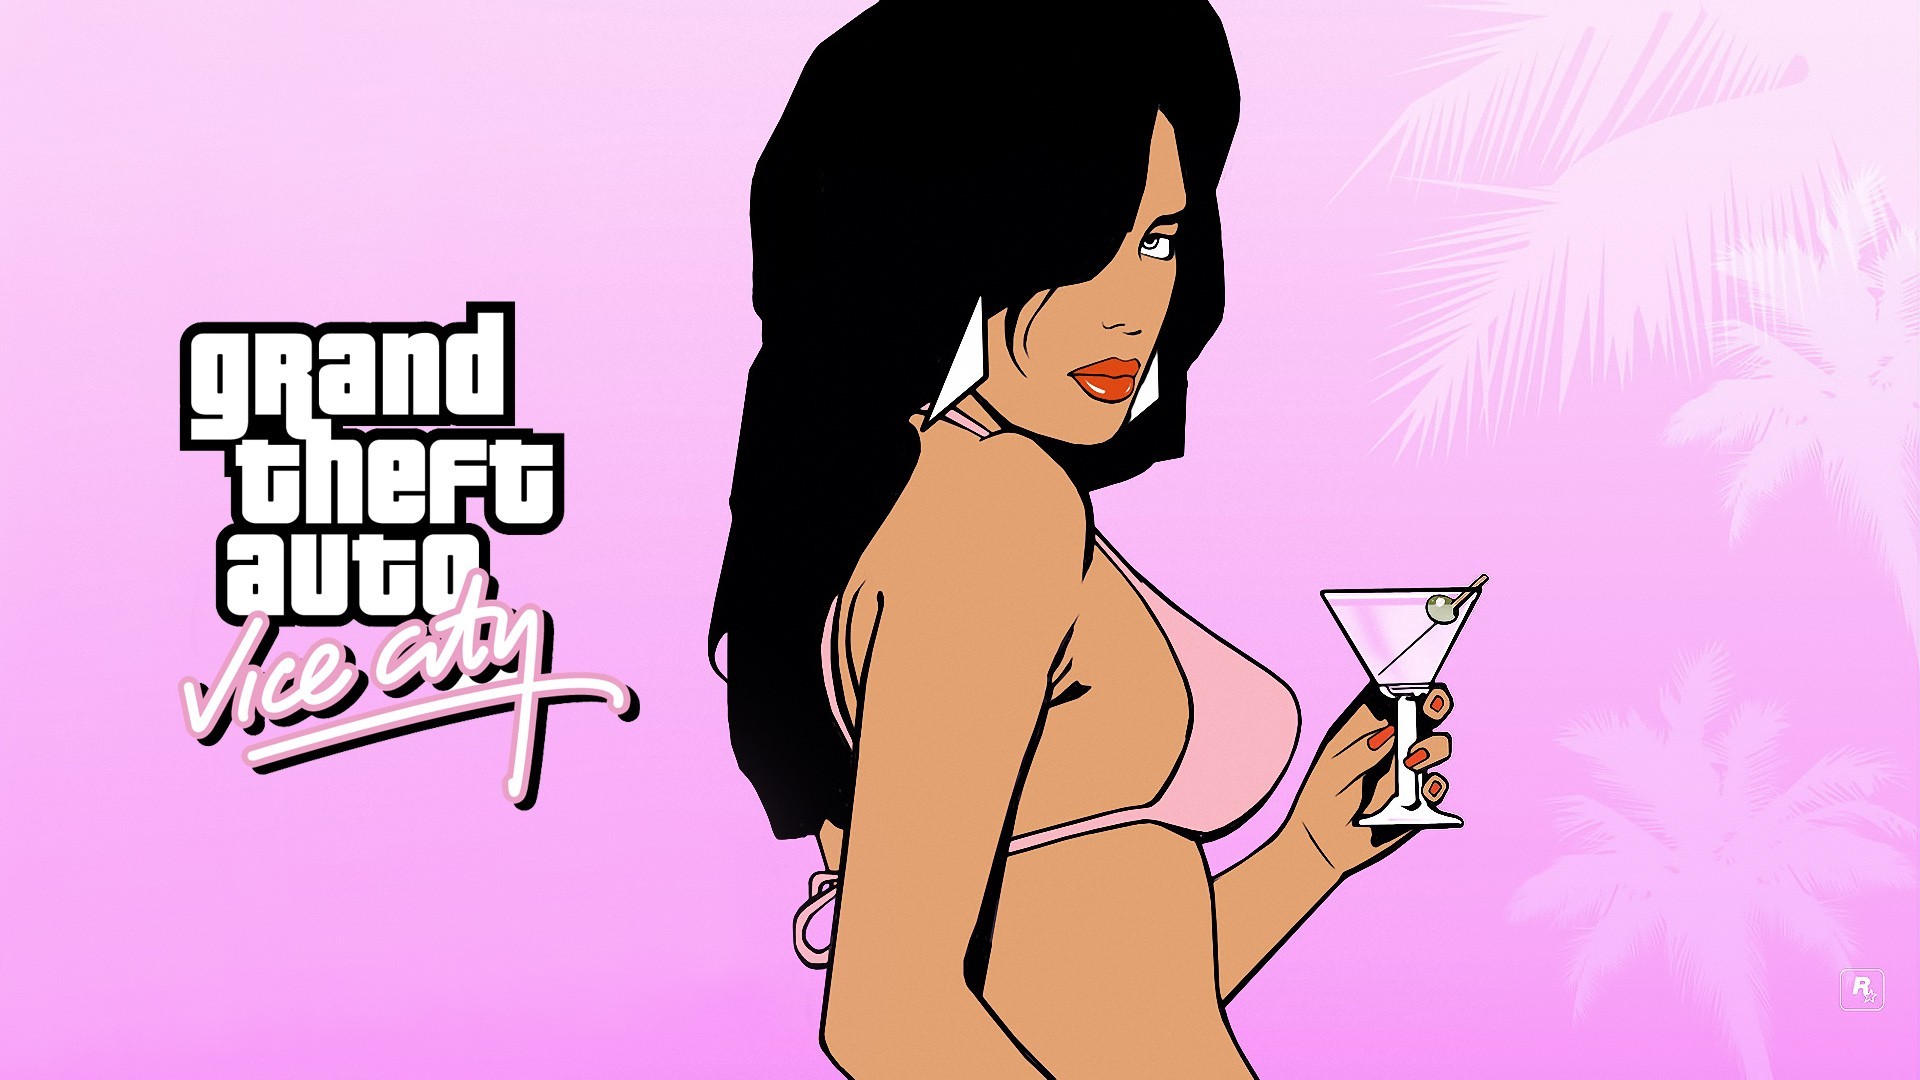 Grand Theft Auto Vice City Grand Theft Auto Video Games Video Game Art Pink Background 1920x1080